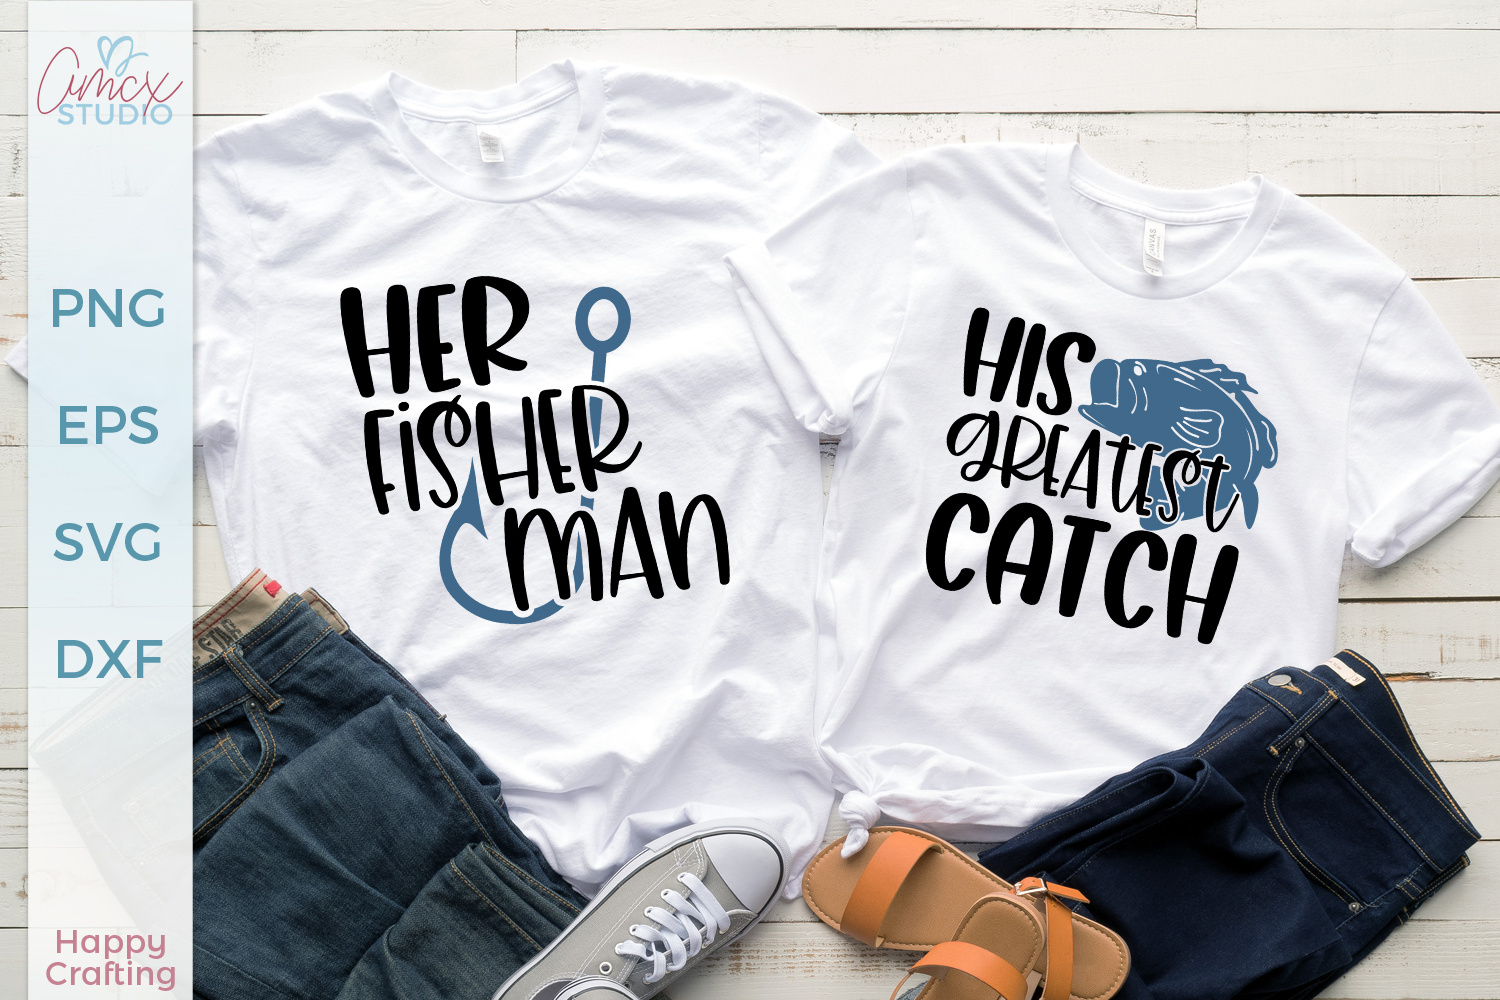 His and Her Fishing Shirts - Couples Shirts SVG Craft file